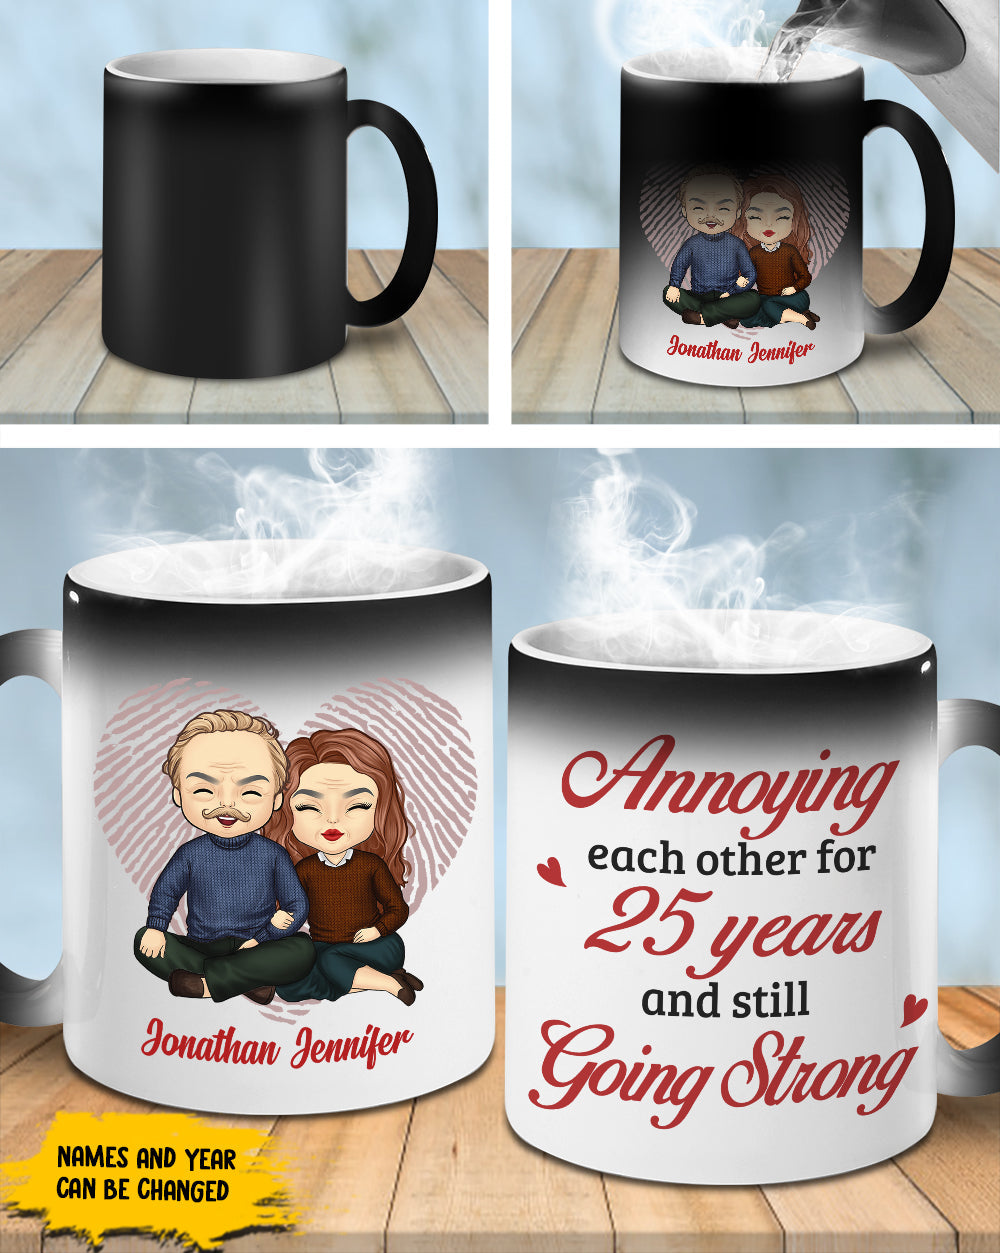 Husband Wife Still Going Strong - Personalized Color Changing Mug - Gift For Couples, Husband Wife